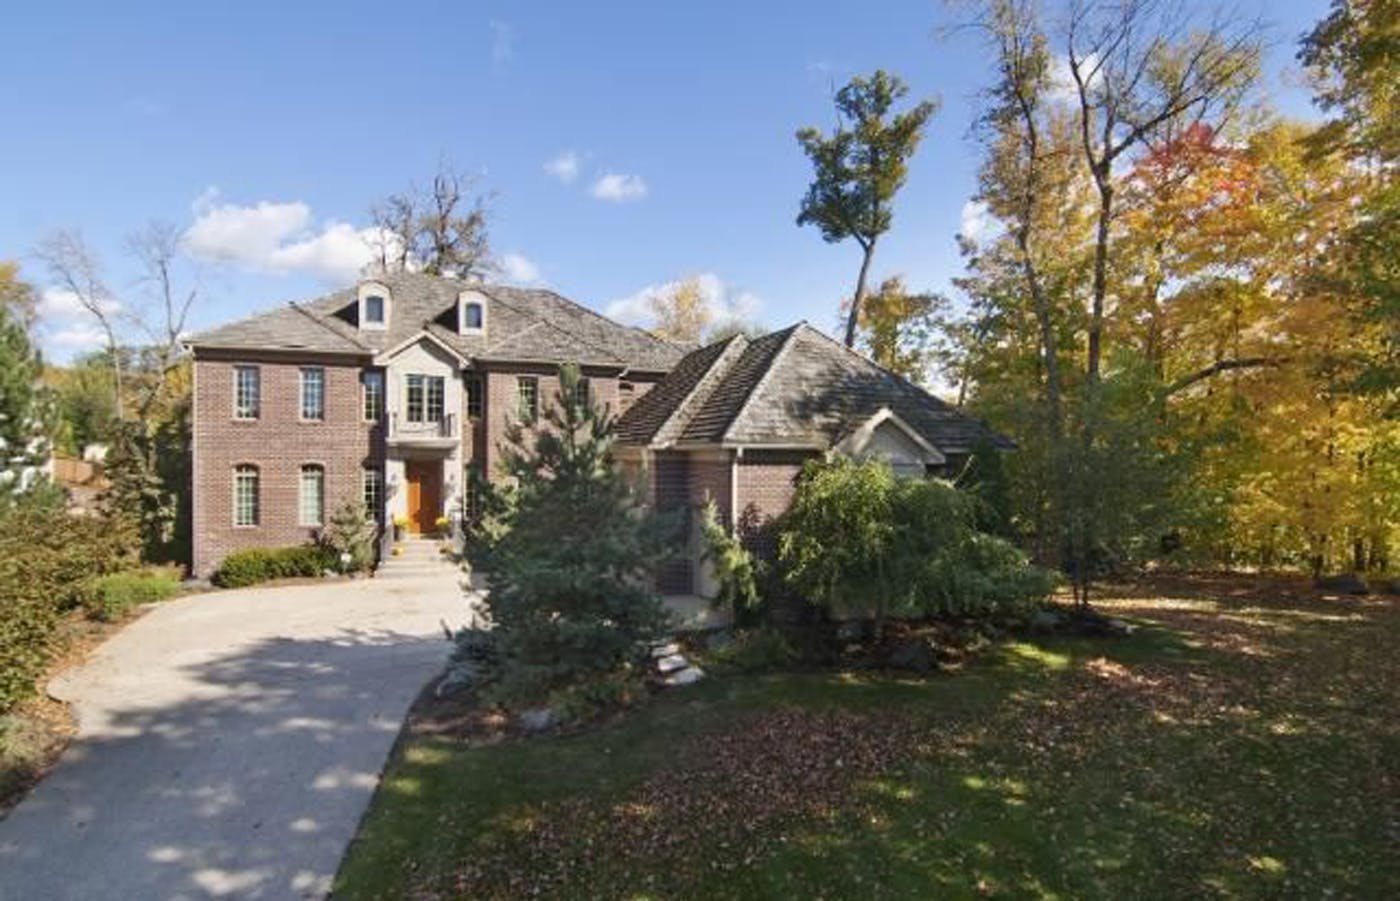 Vikings quarterback Christian Ponder has "just listed" for sale a $1 million Lake Minnetonka home he bought 16 months ago.